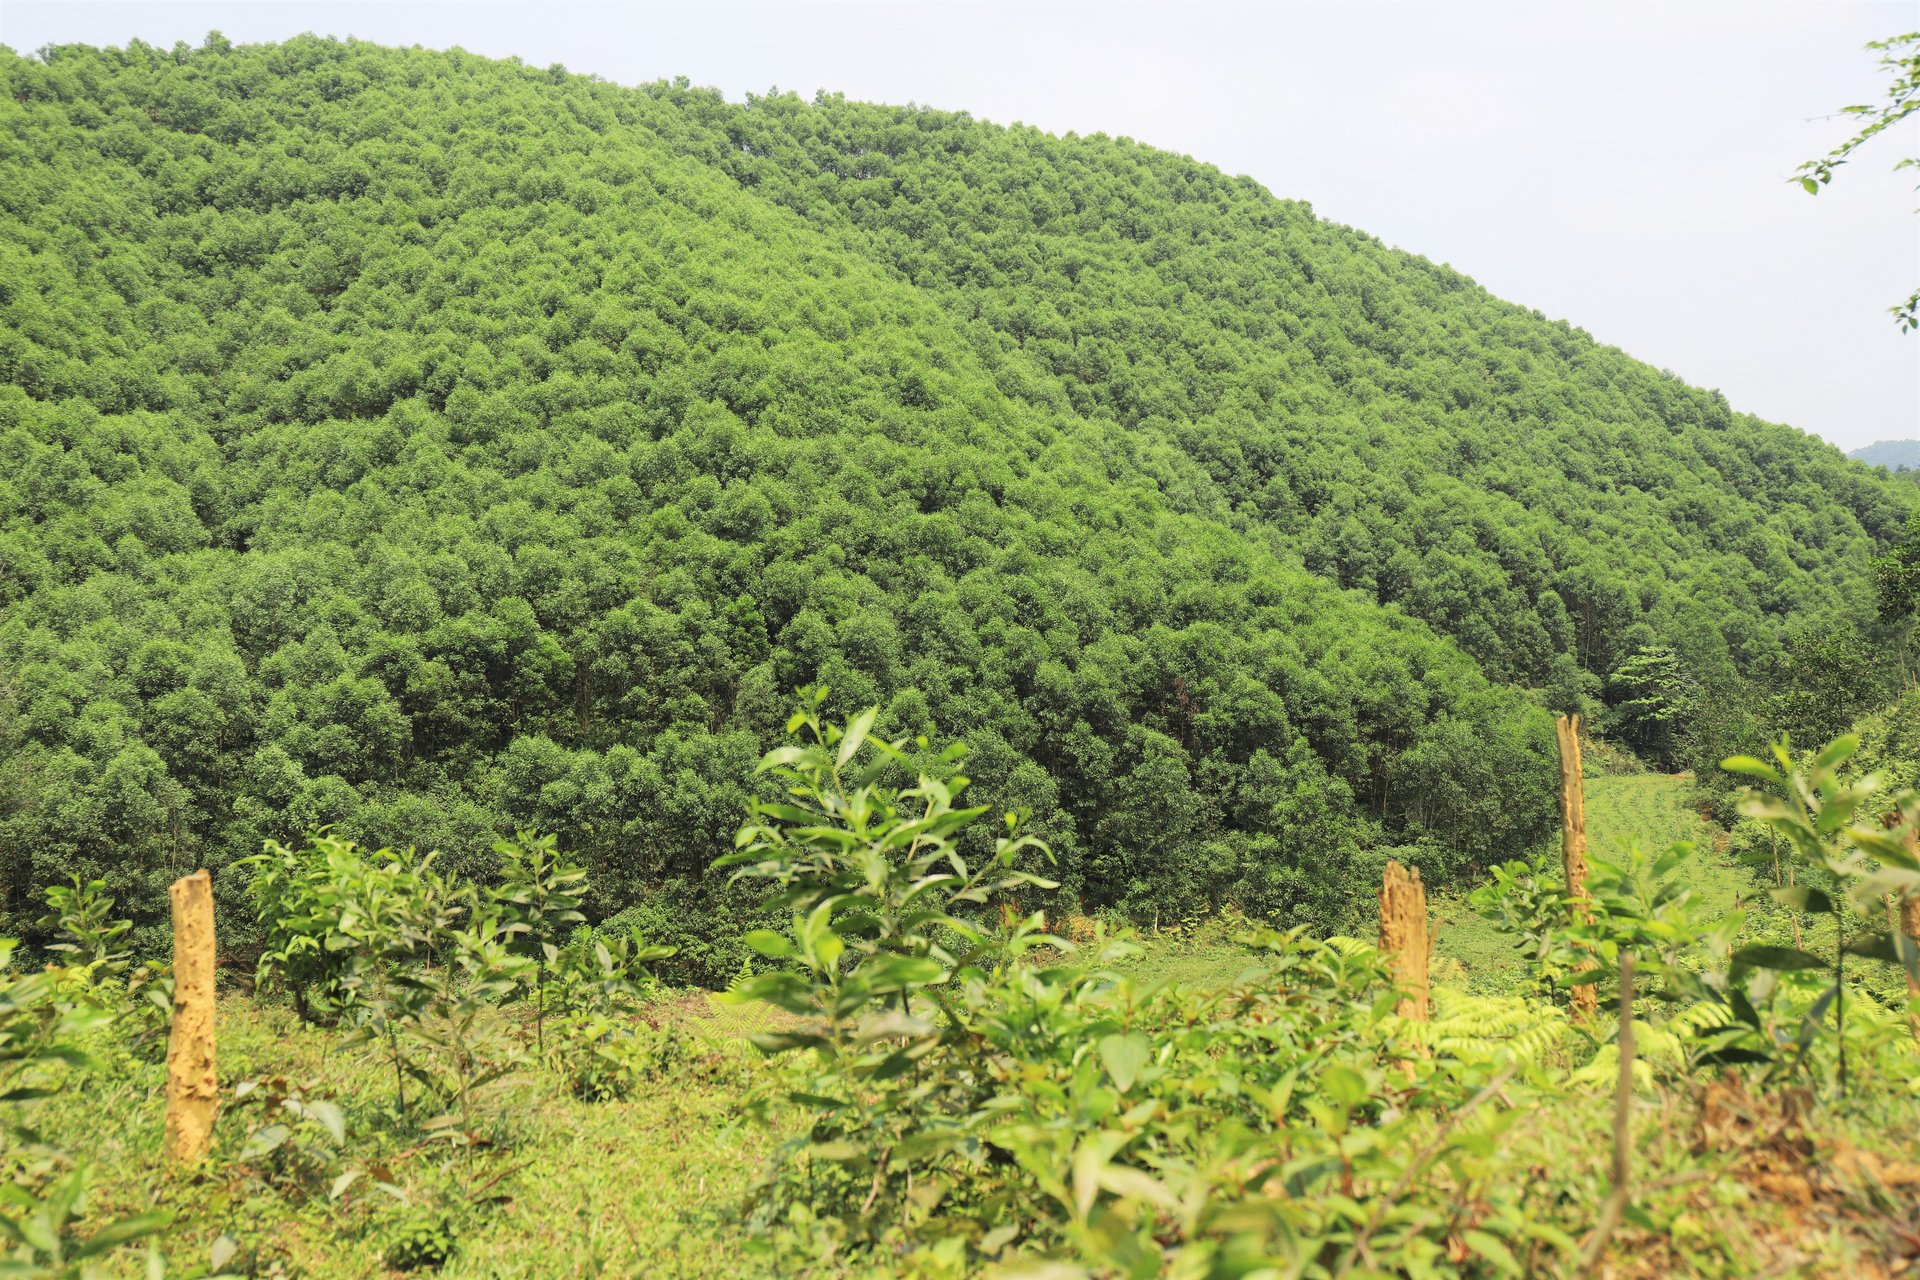 Up to now, the whole province of Ha Tinh has more than 25,700 hectares of forests having FSC, VFCS/PEFC certifications.